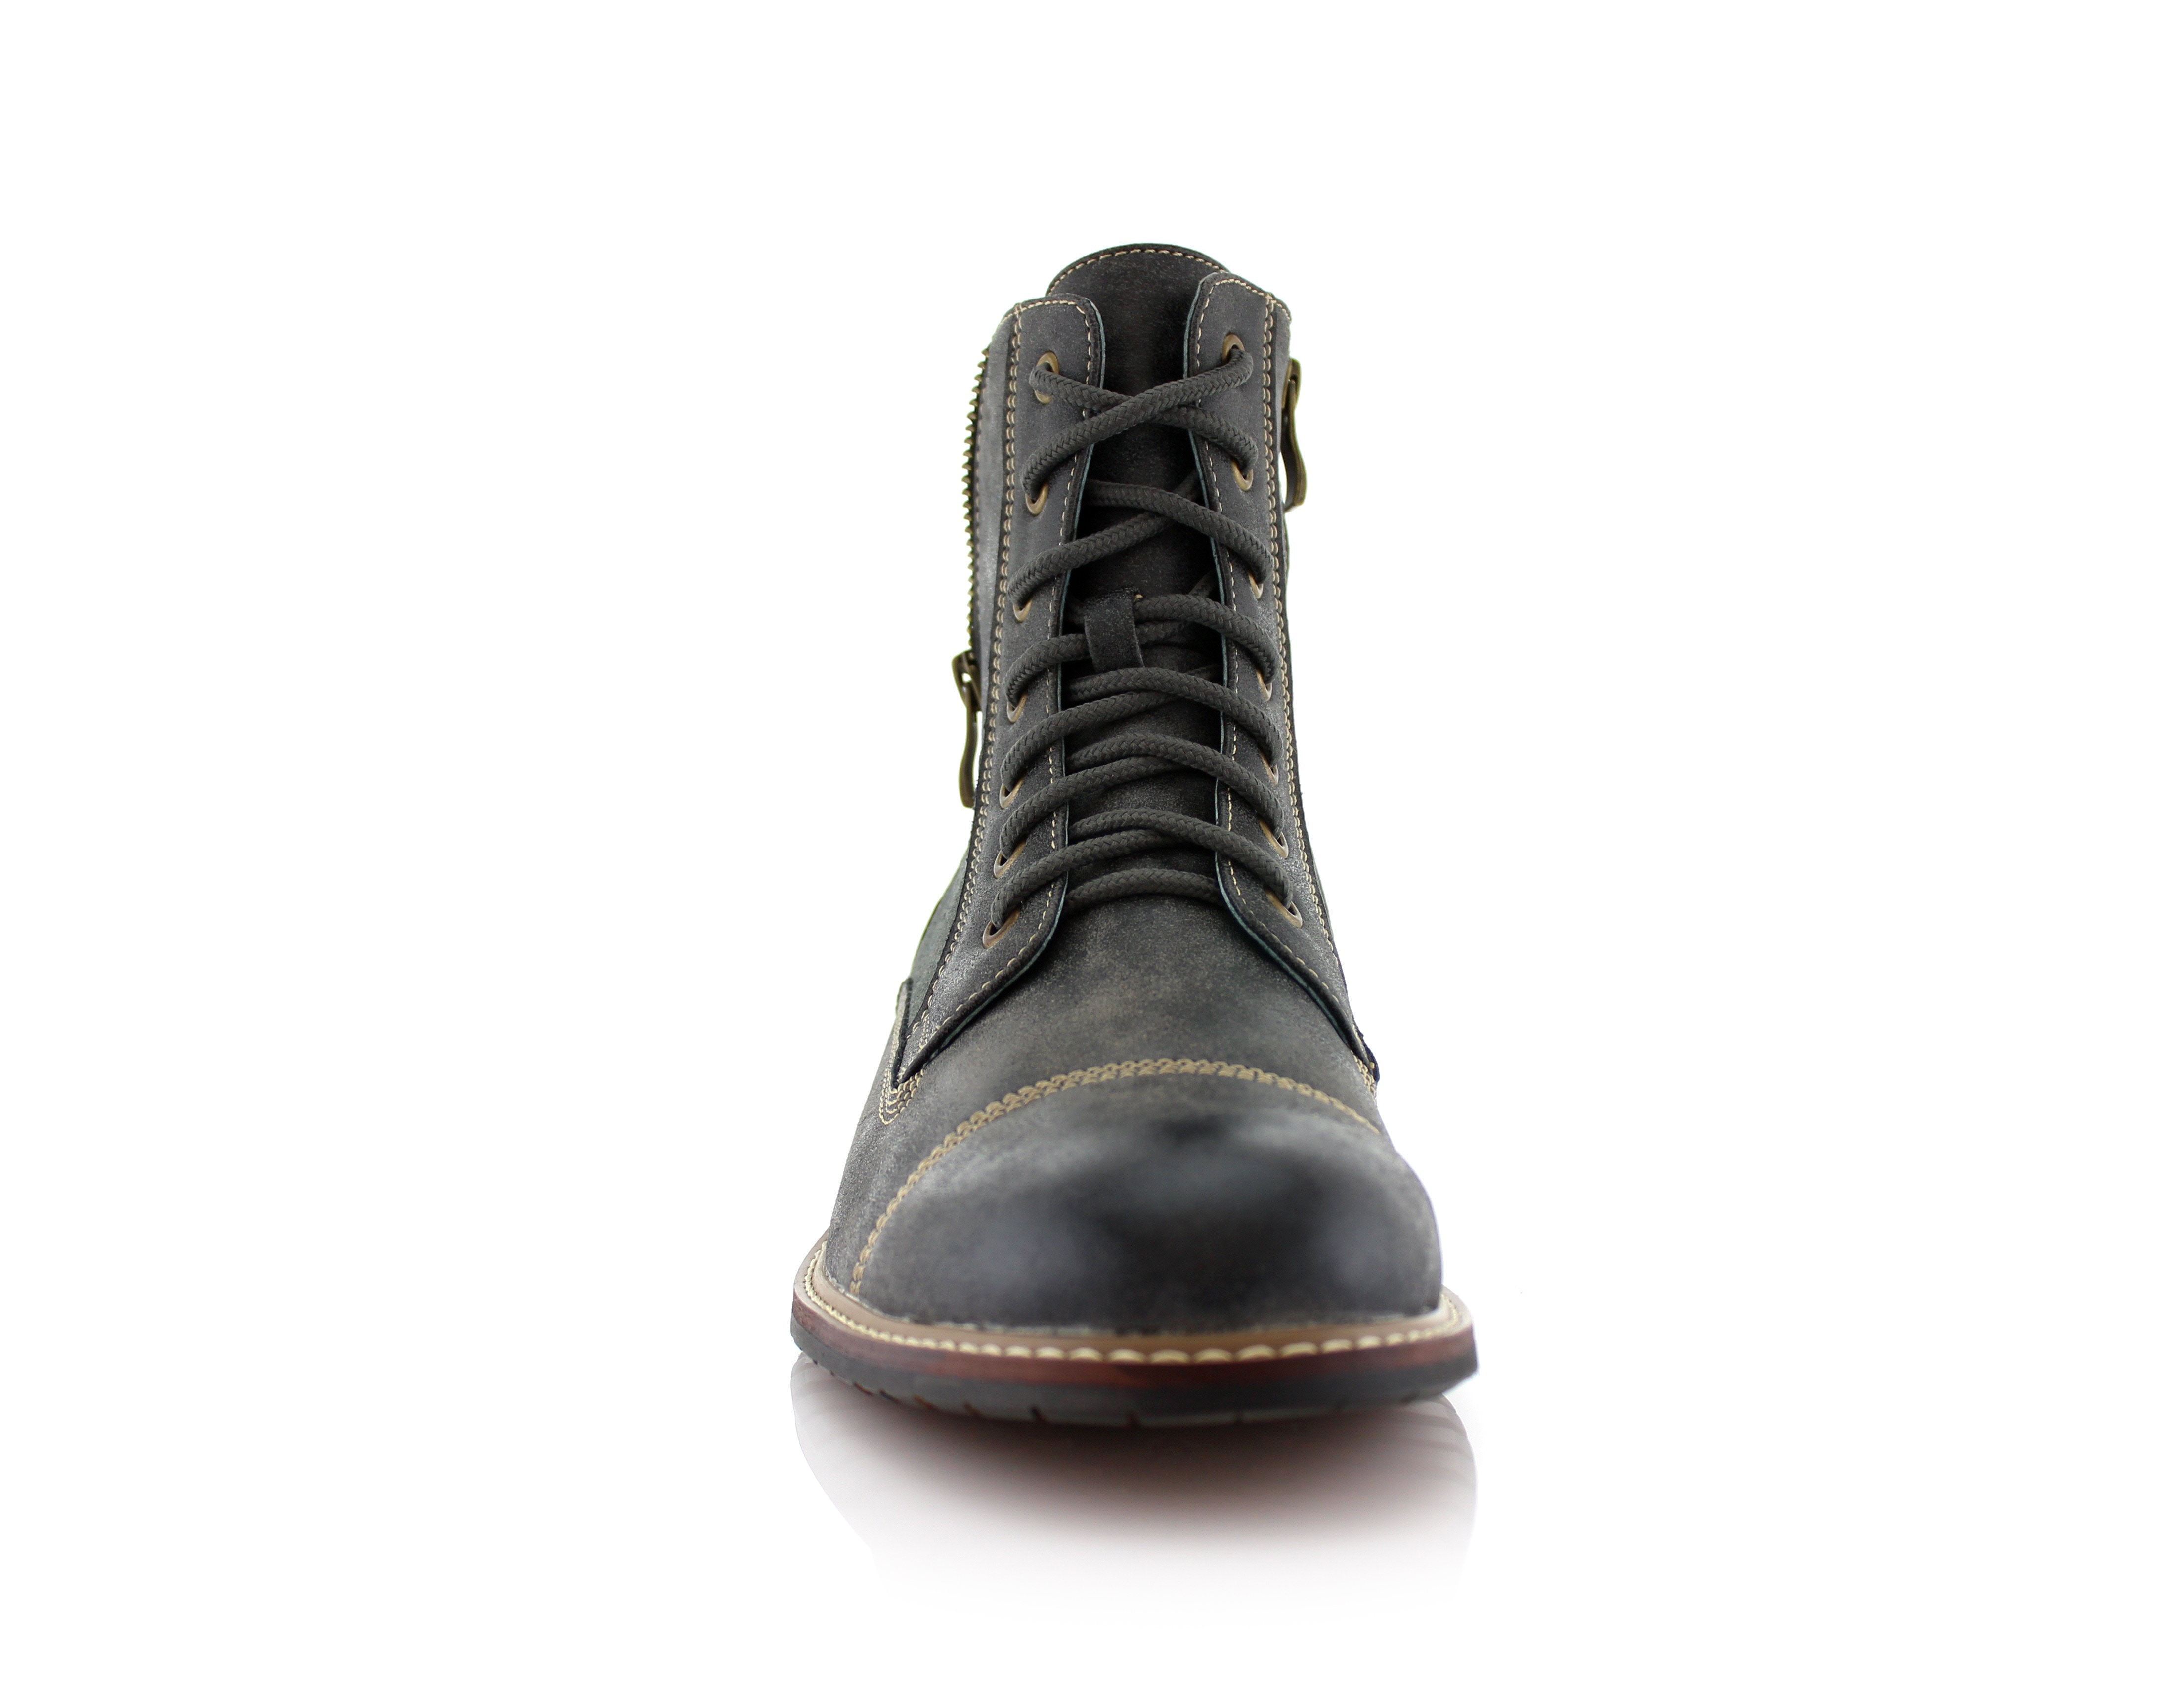 Duo-Textured Zipper Closure Combat Boots | Andy by Ferro Aldo | Conal Footwear | Front Angle View